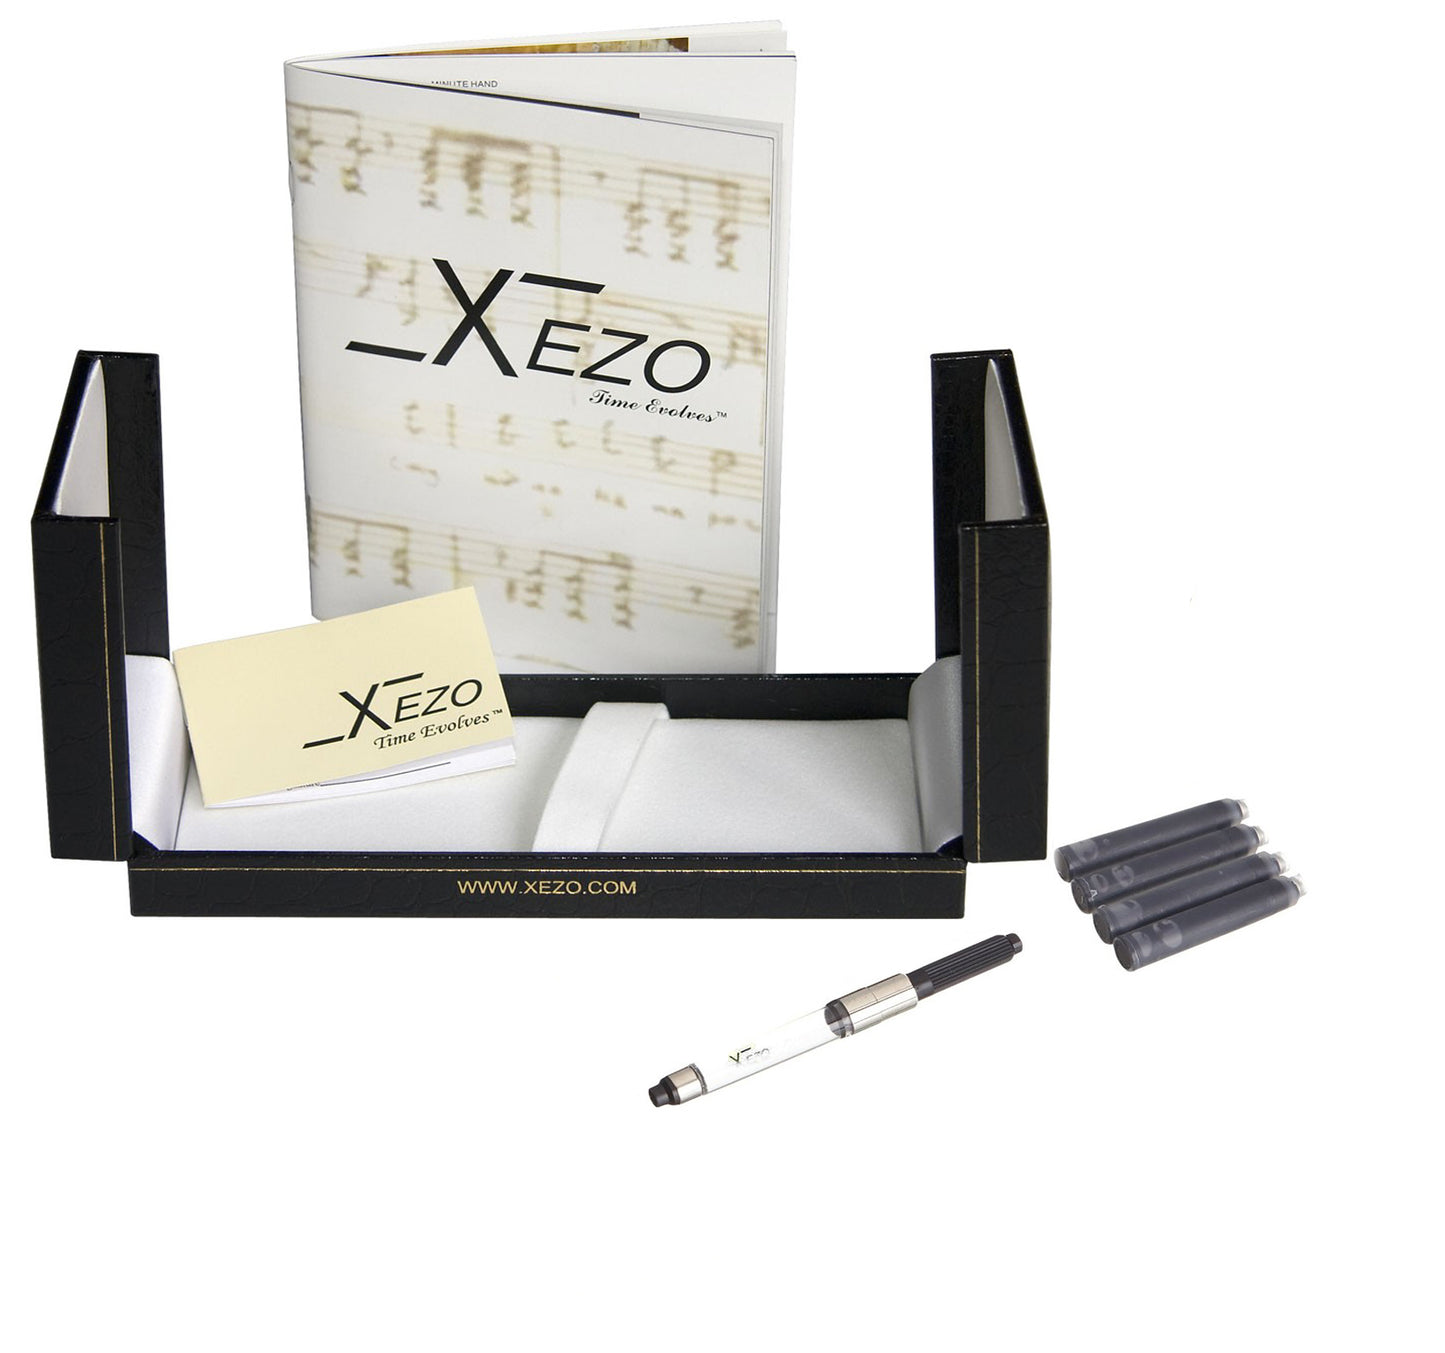 Xezo - Black gift box, certificate, manual, chrome-plated ink converter, and four ink cartridges of the Tribune Gold FM fountain pen